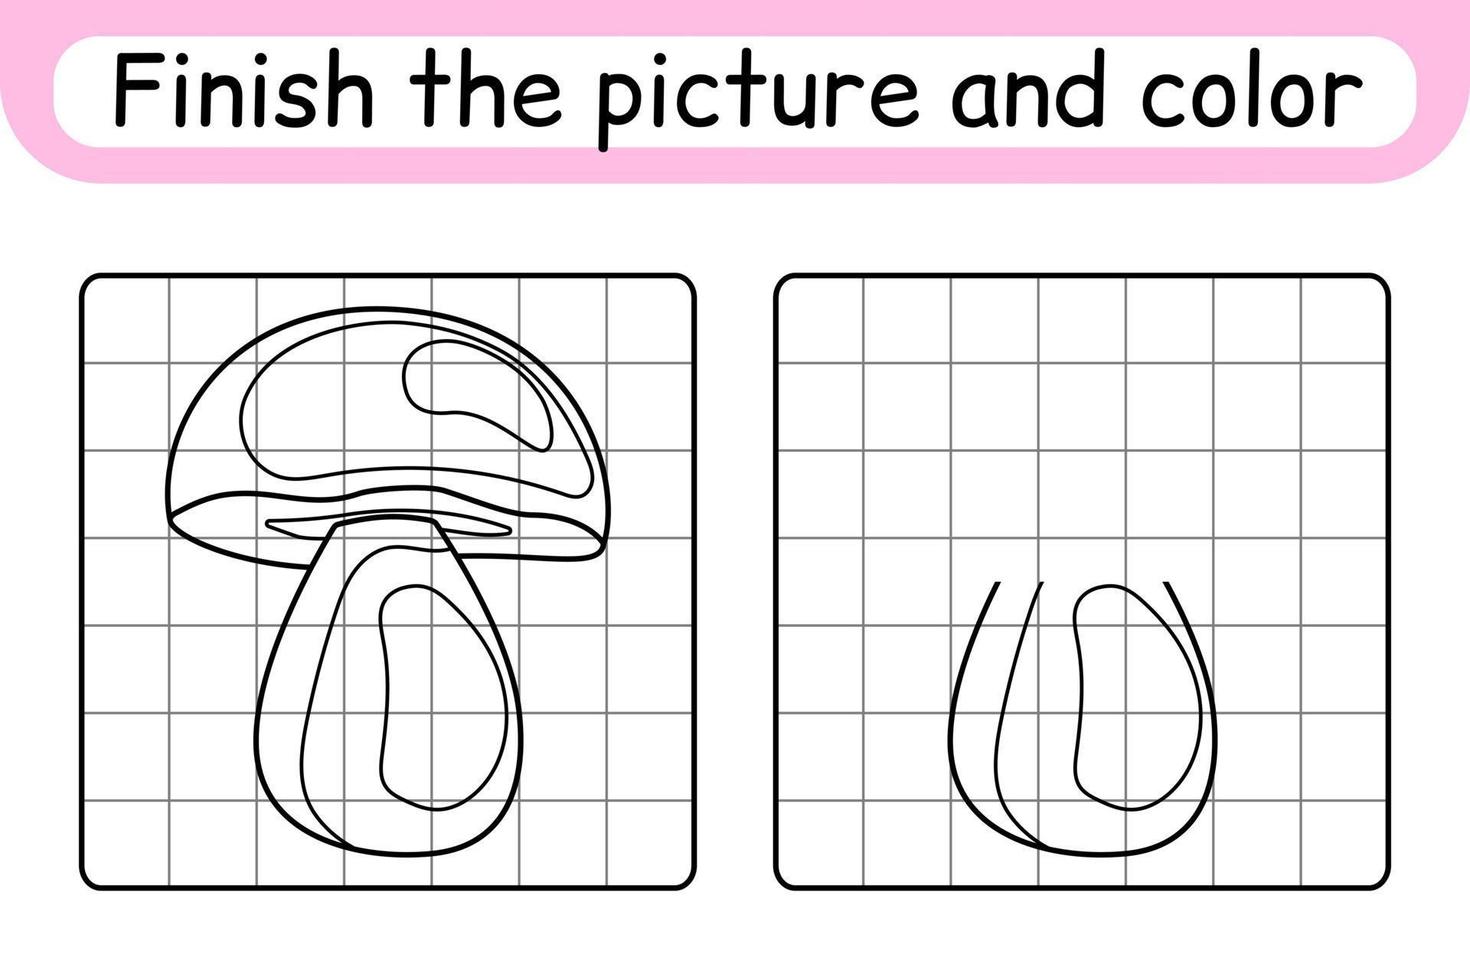 Complete the picture mushroom boletus. Copy the picture and color. Finish the image. Coloring book. Educational drawing exercise game for children vector